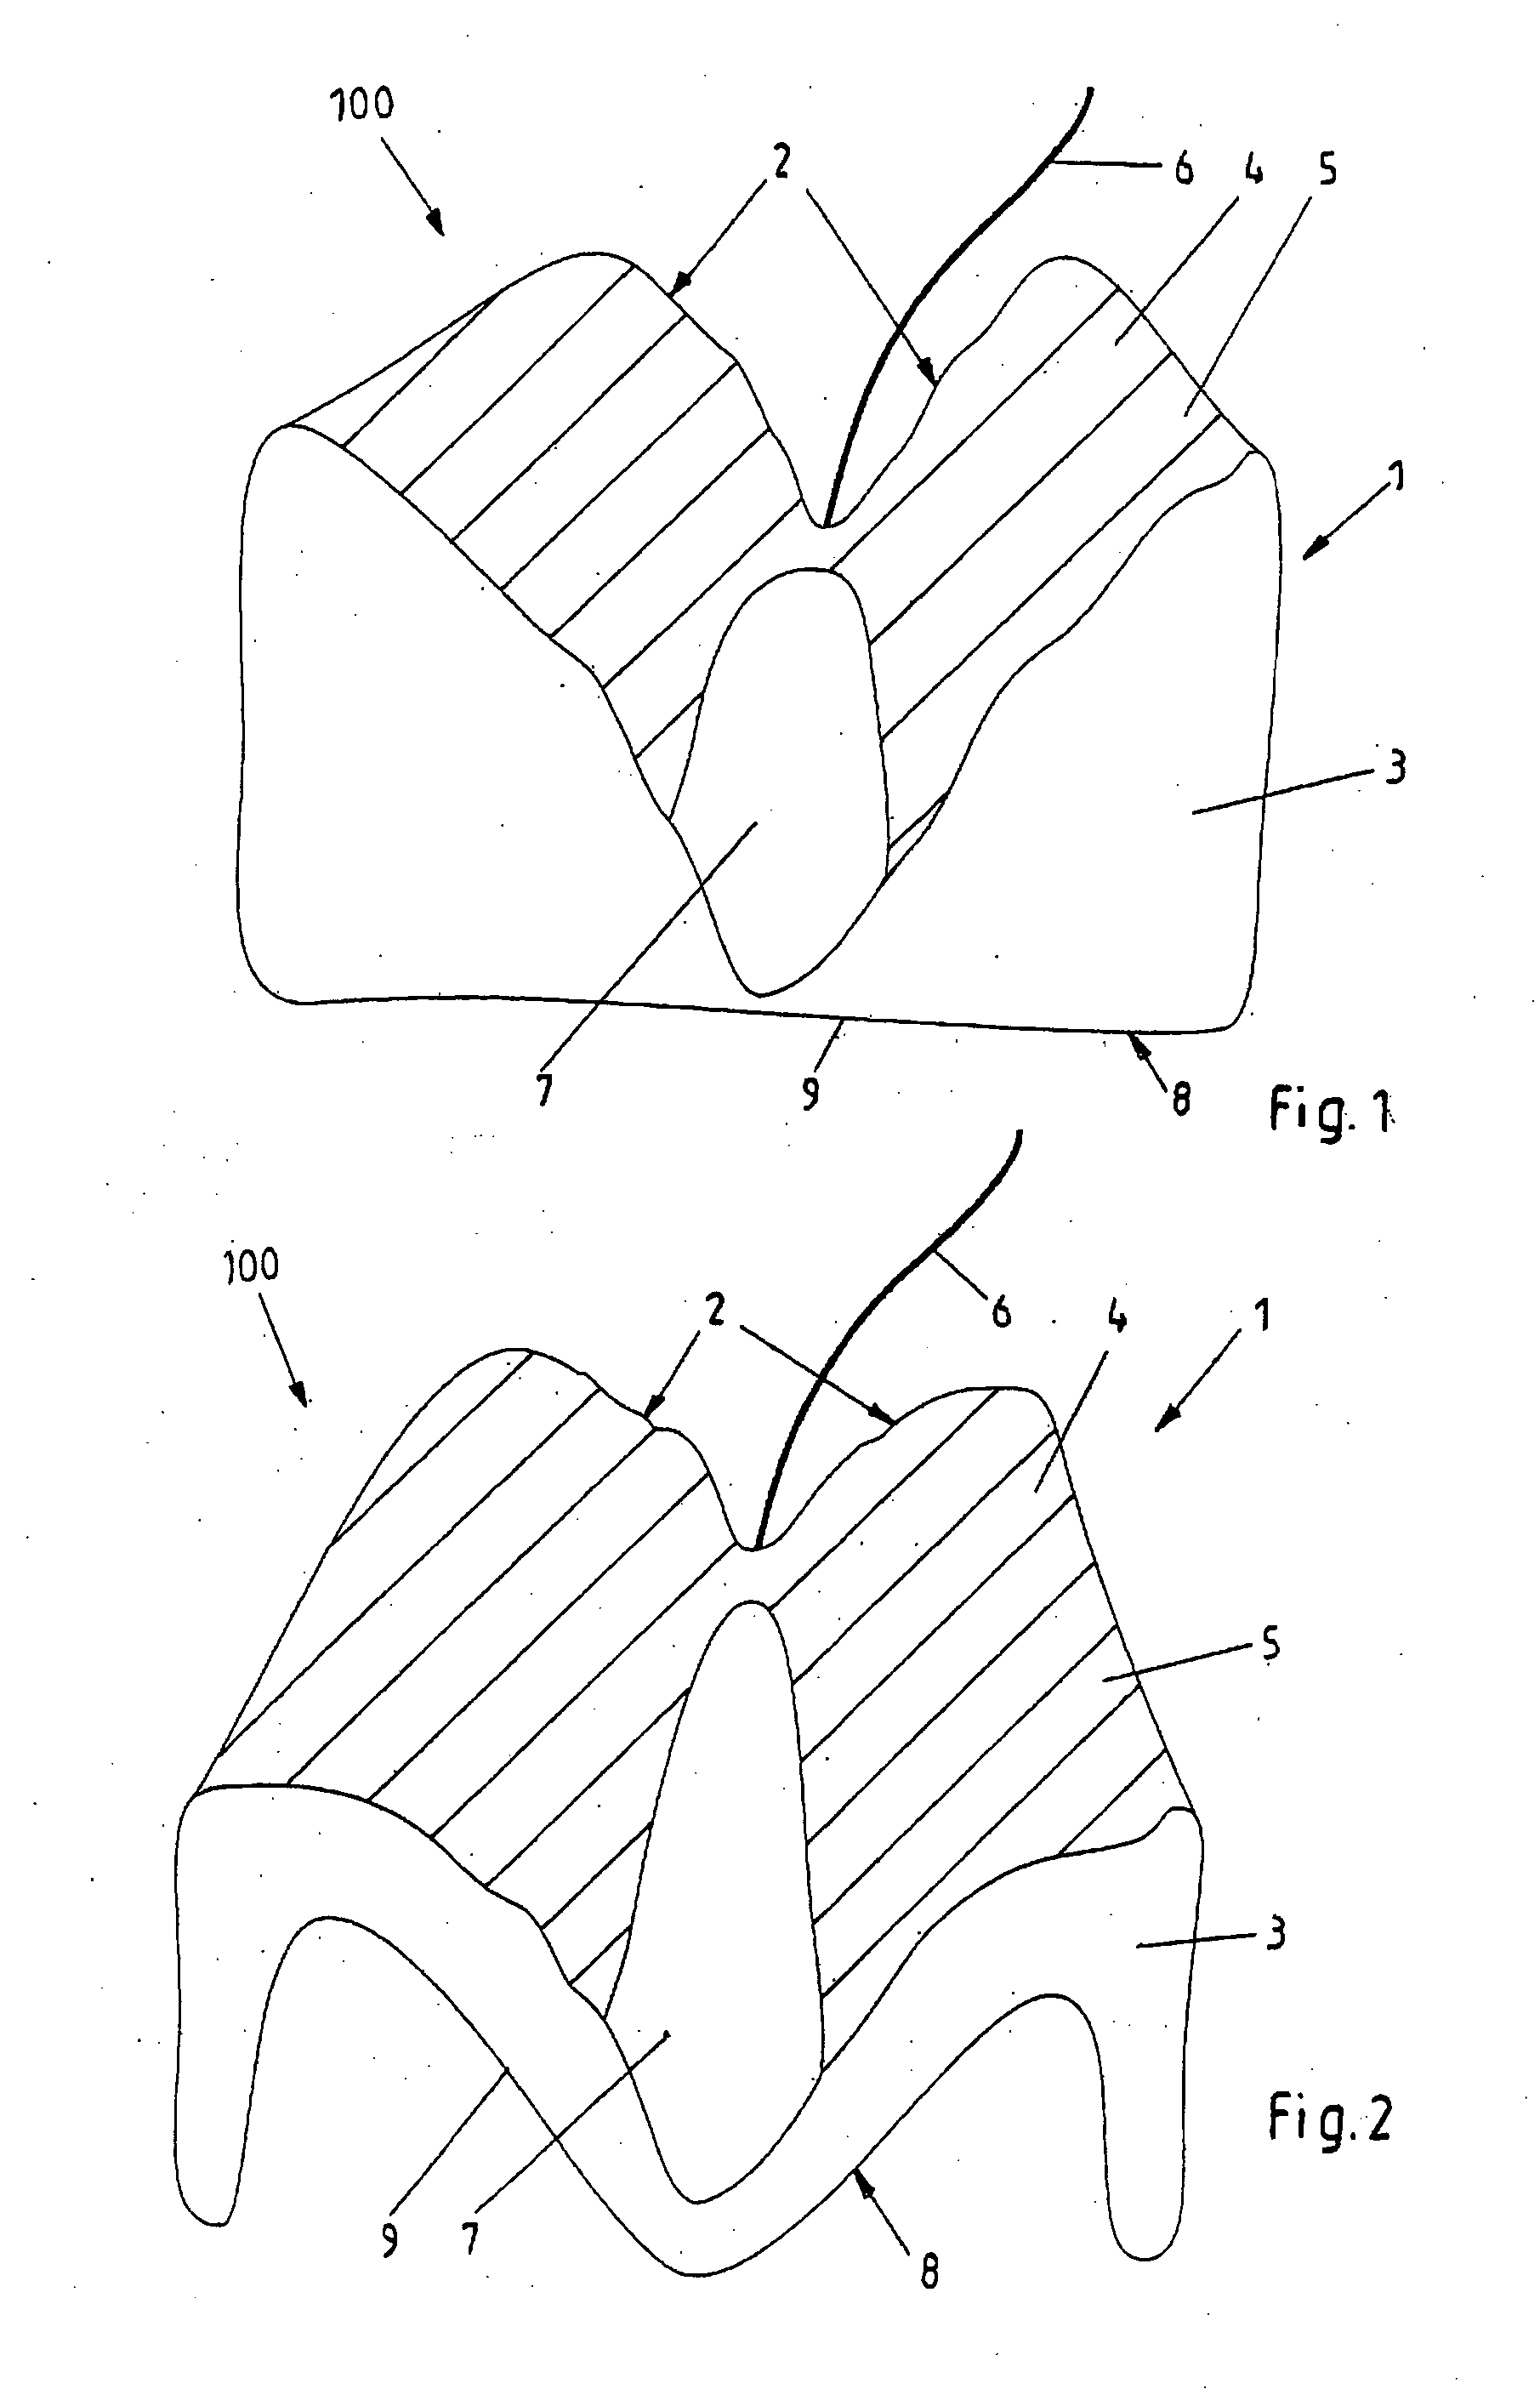 Apparatus for submental electrical stimulation of the supra hyoid muscles of the floor of mouth